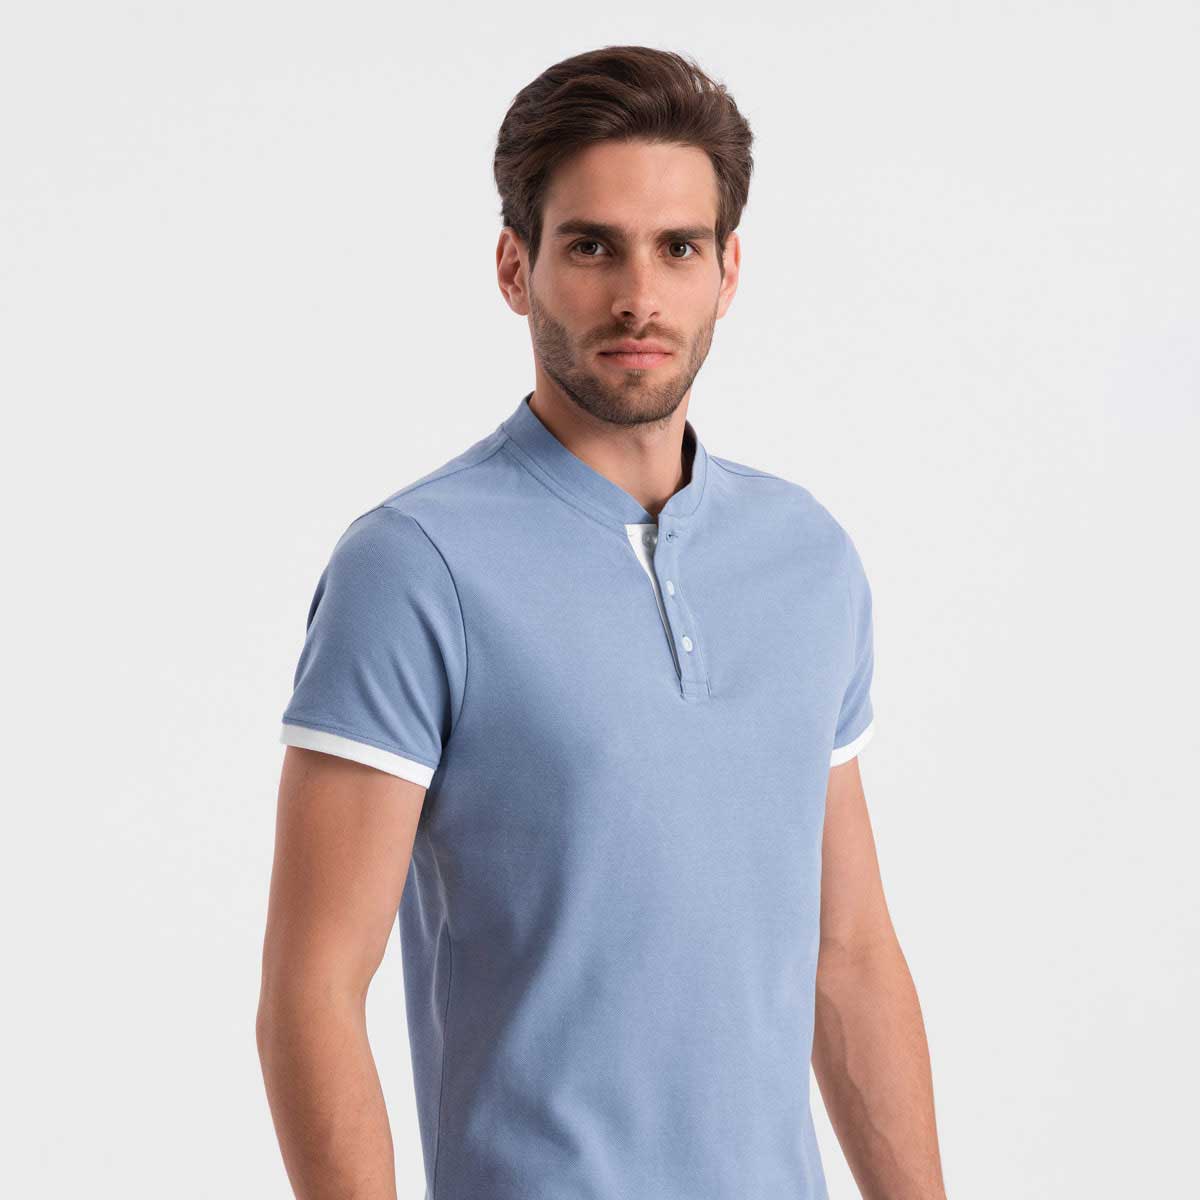 Wholesale Polo Shirts Manufacturers in Nicaragua